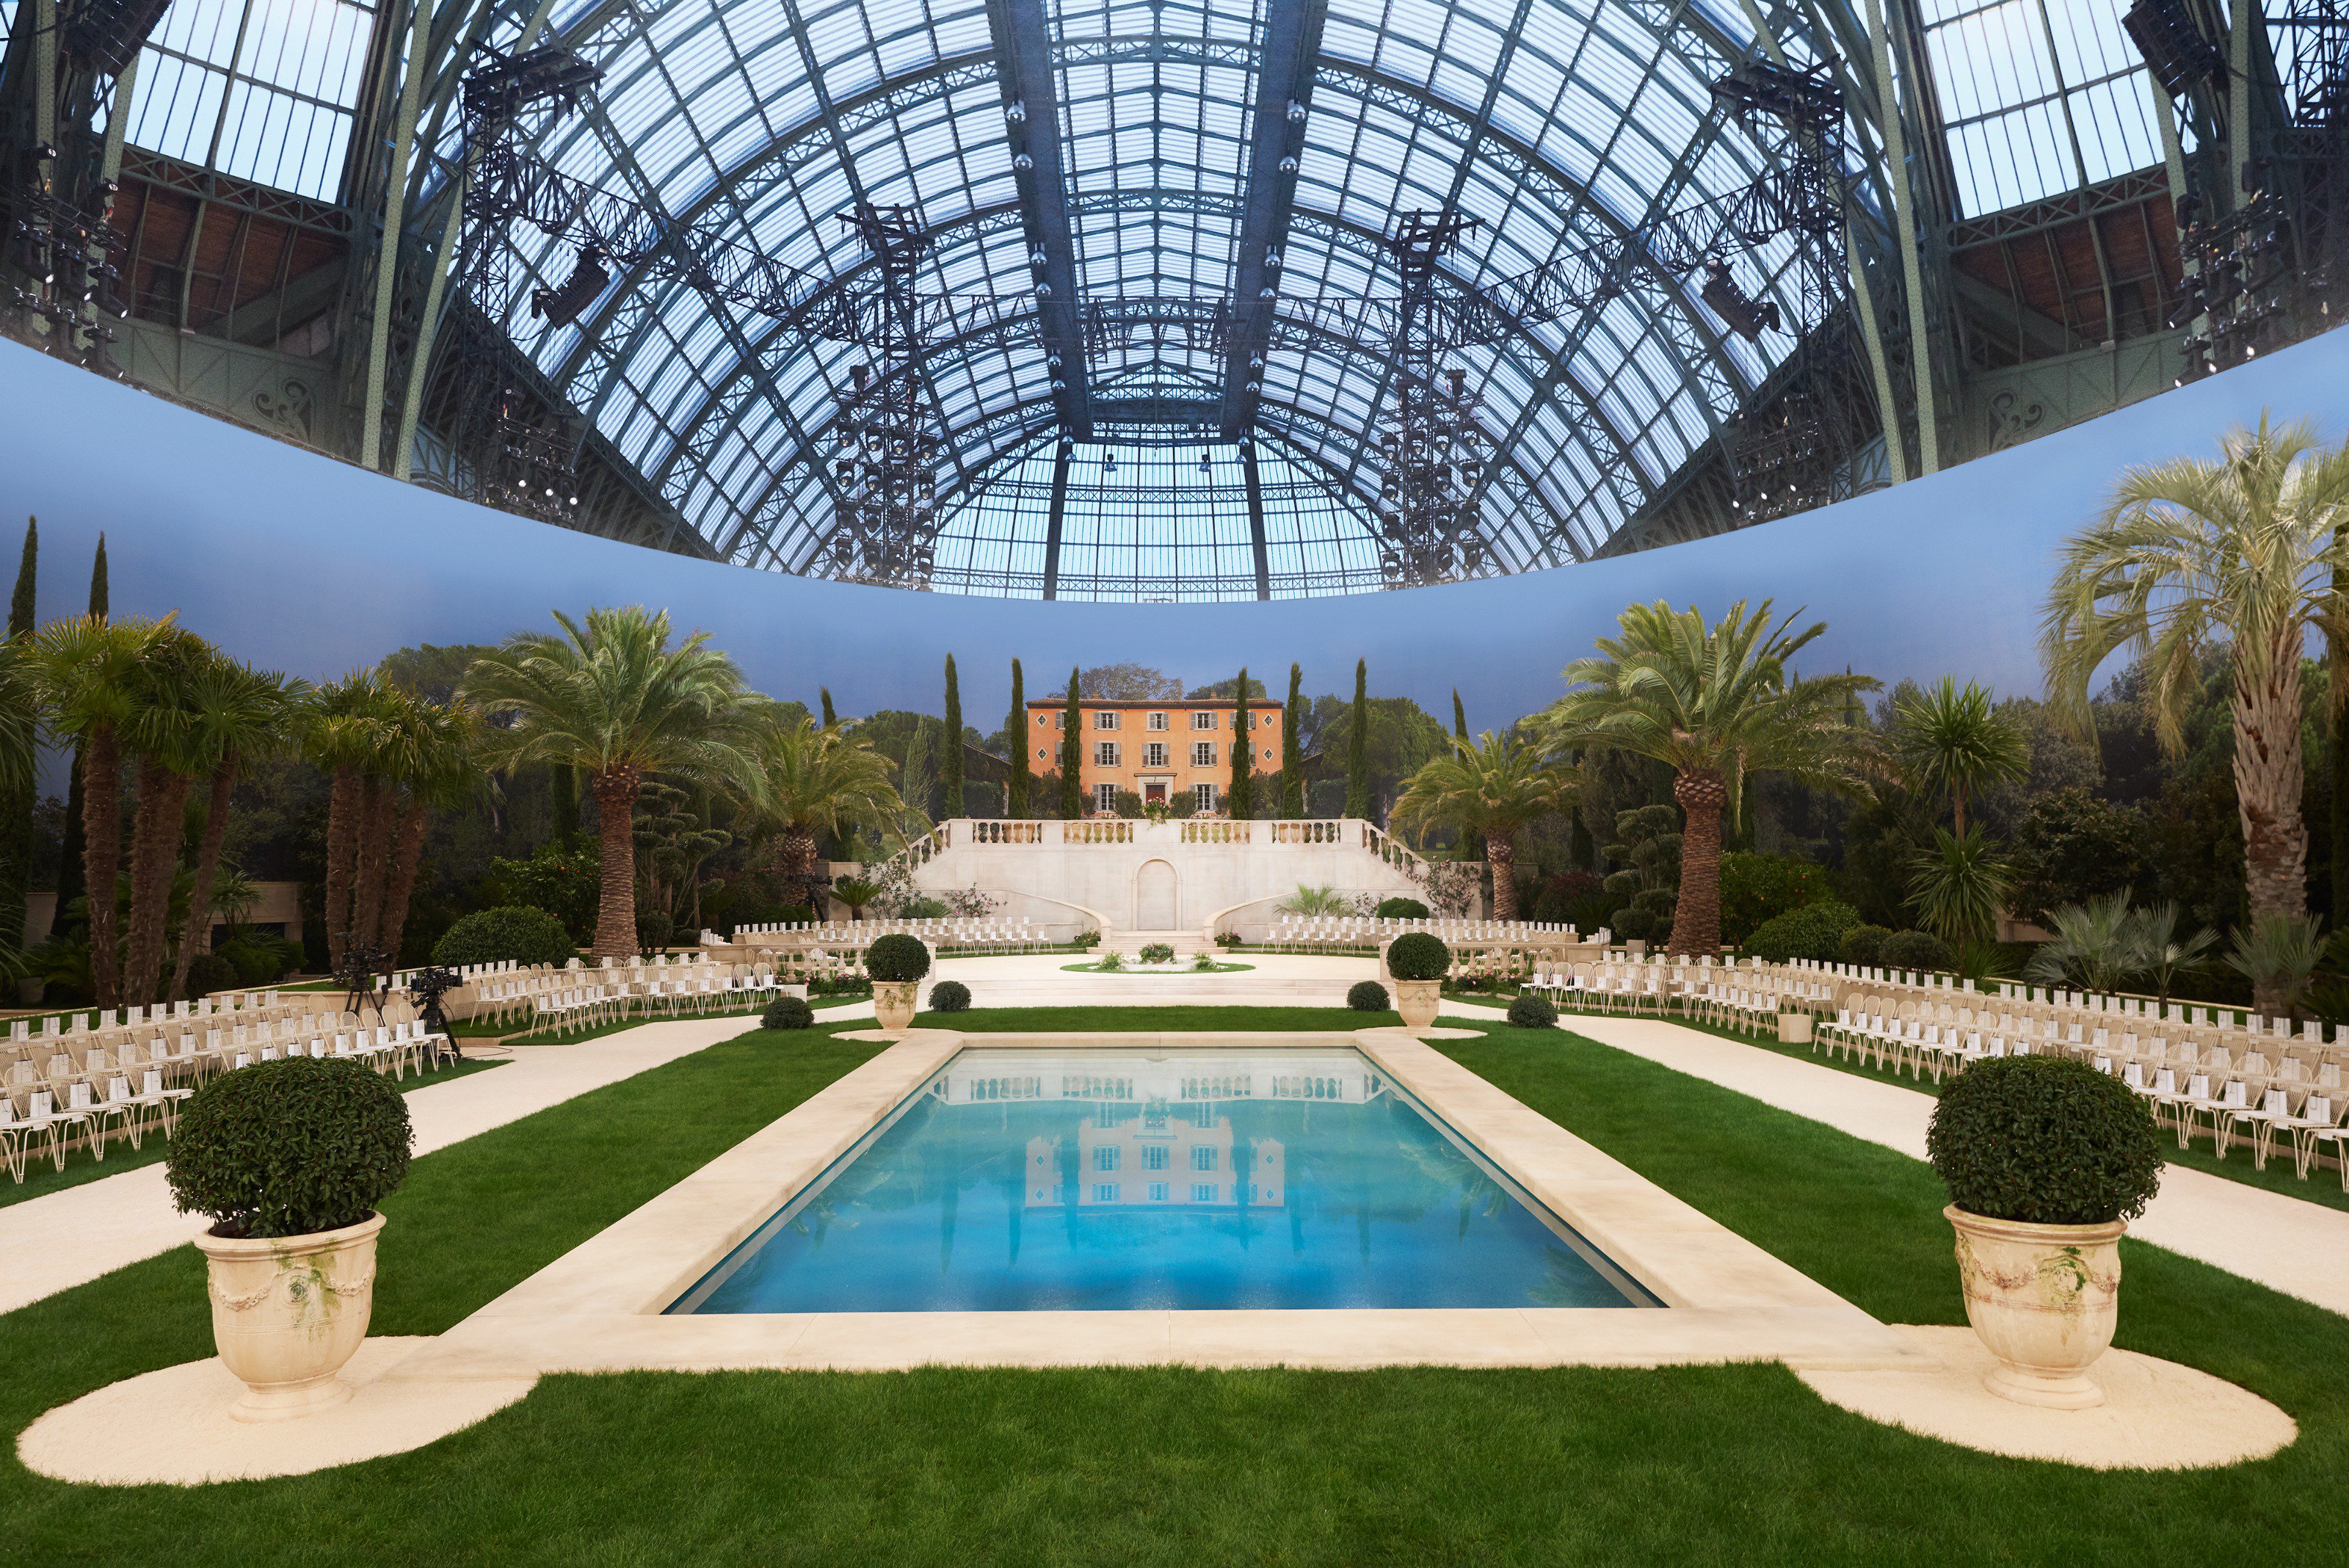 CHANEL on Twitter: "The Spring-Summer 2019 #CHANELHauteCouture show is set  in the garden of the #VillaCHANEL imagined by Karl Lagerfeld. More on  https://t.co/z3XDXboKNZ https://t.co/7UZajr4V5R" / Twitter